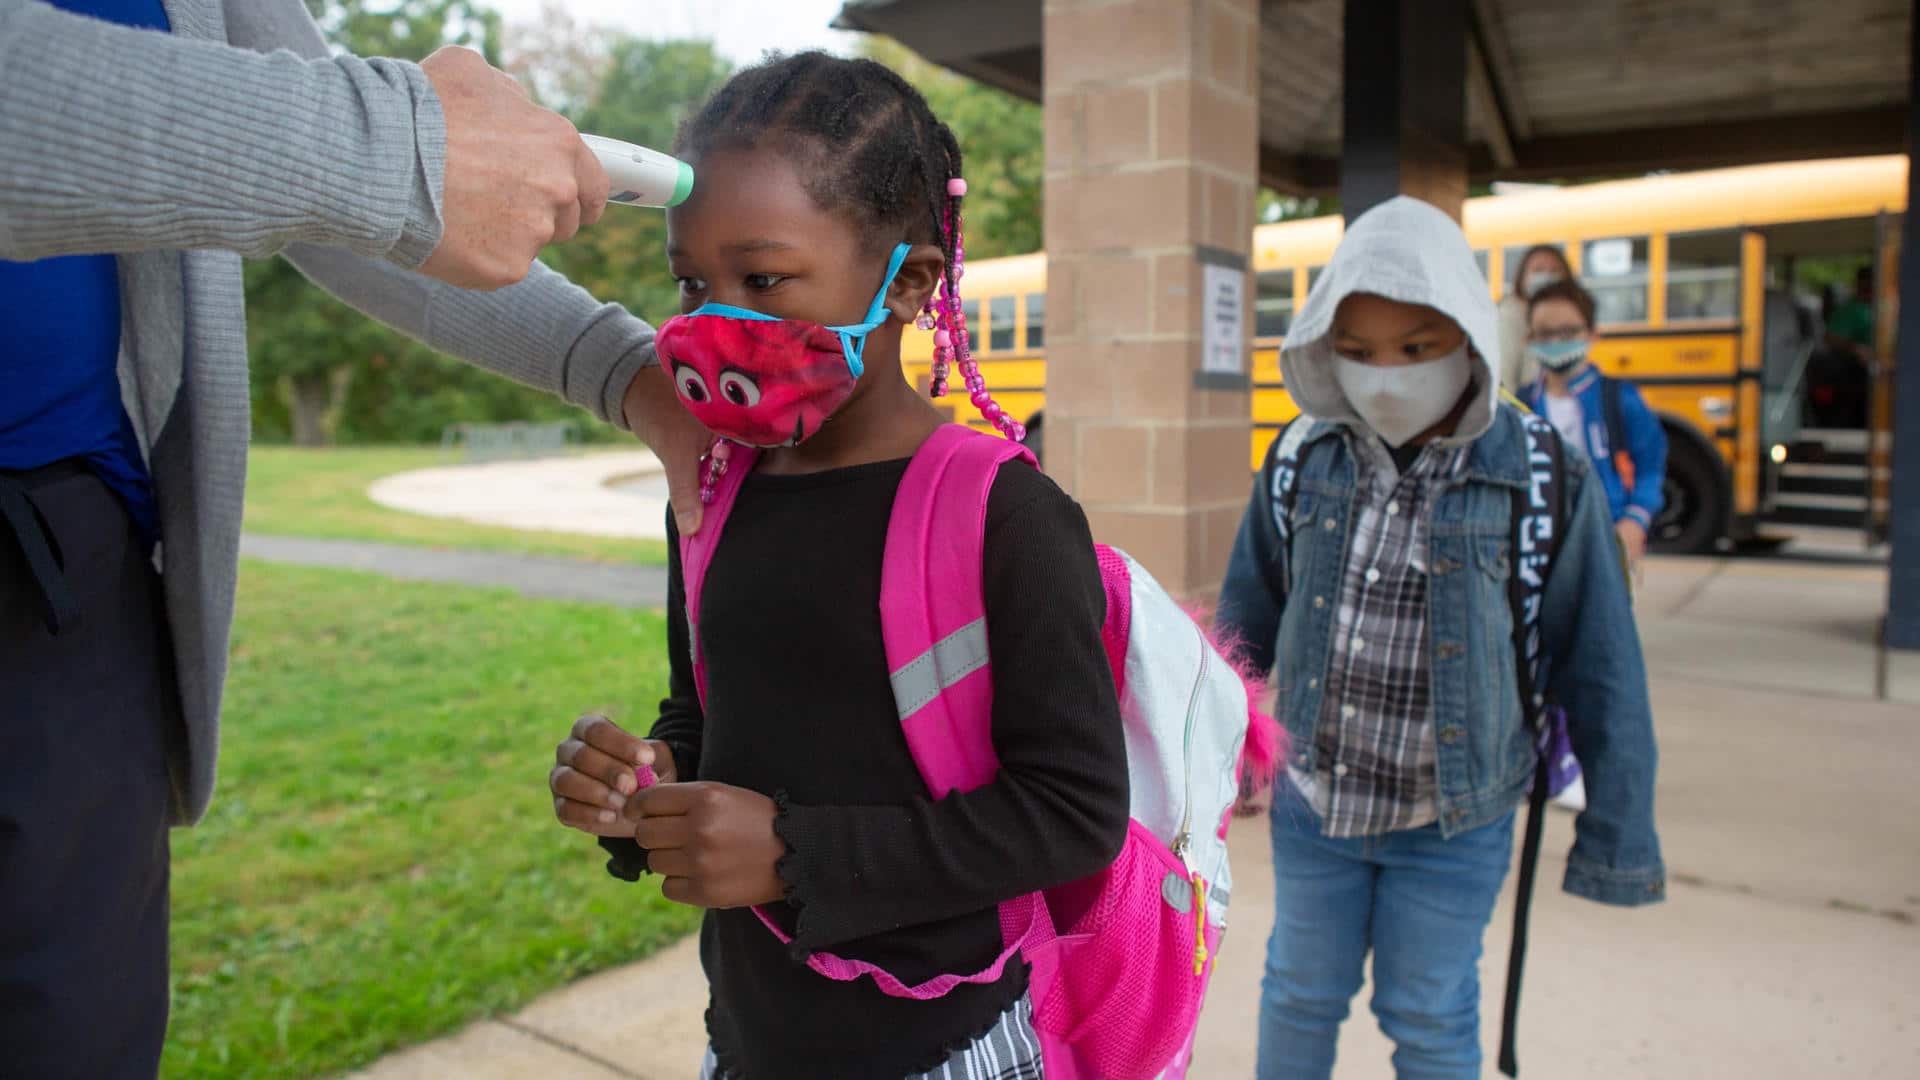 A group of elementary students wait to have their temperatures checked before entering school.